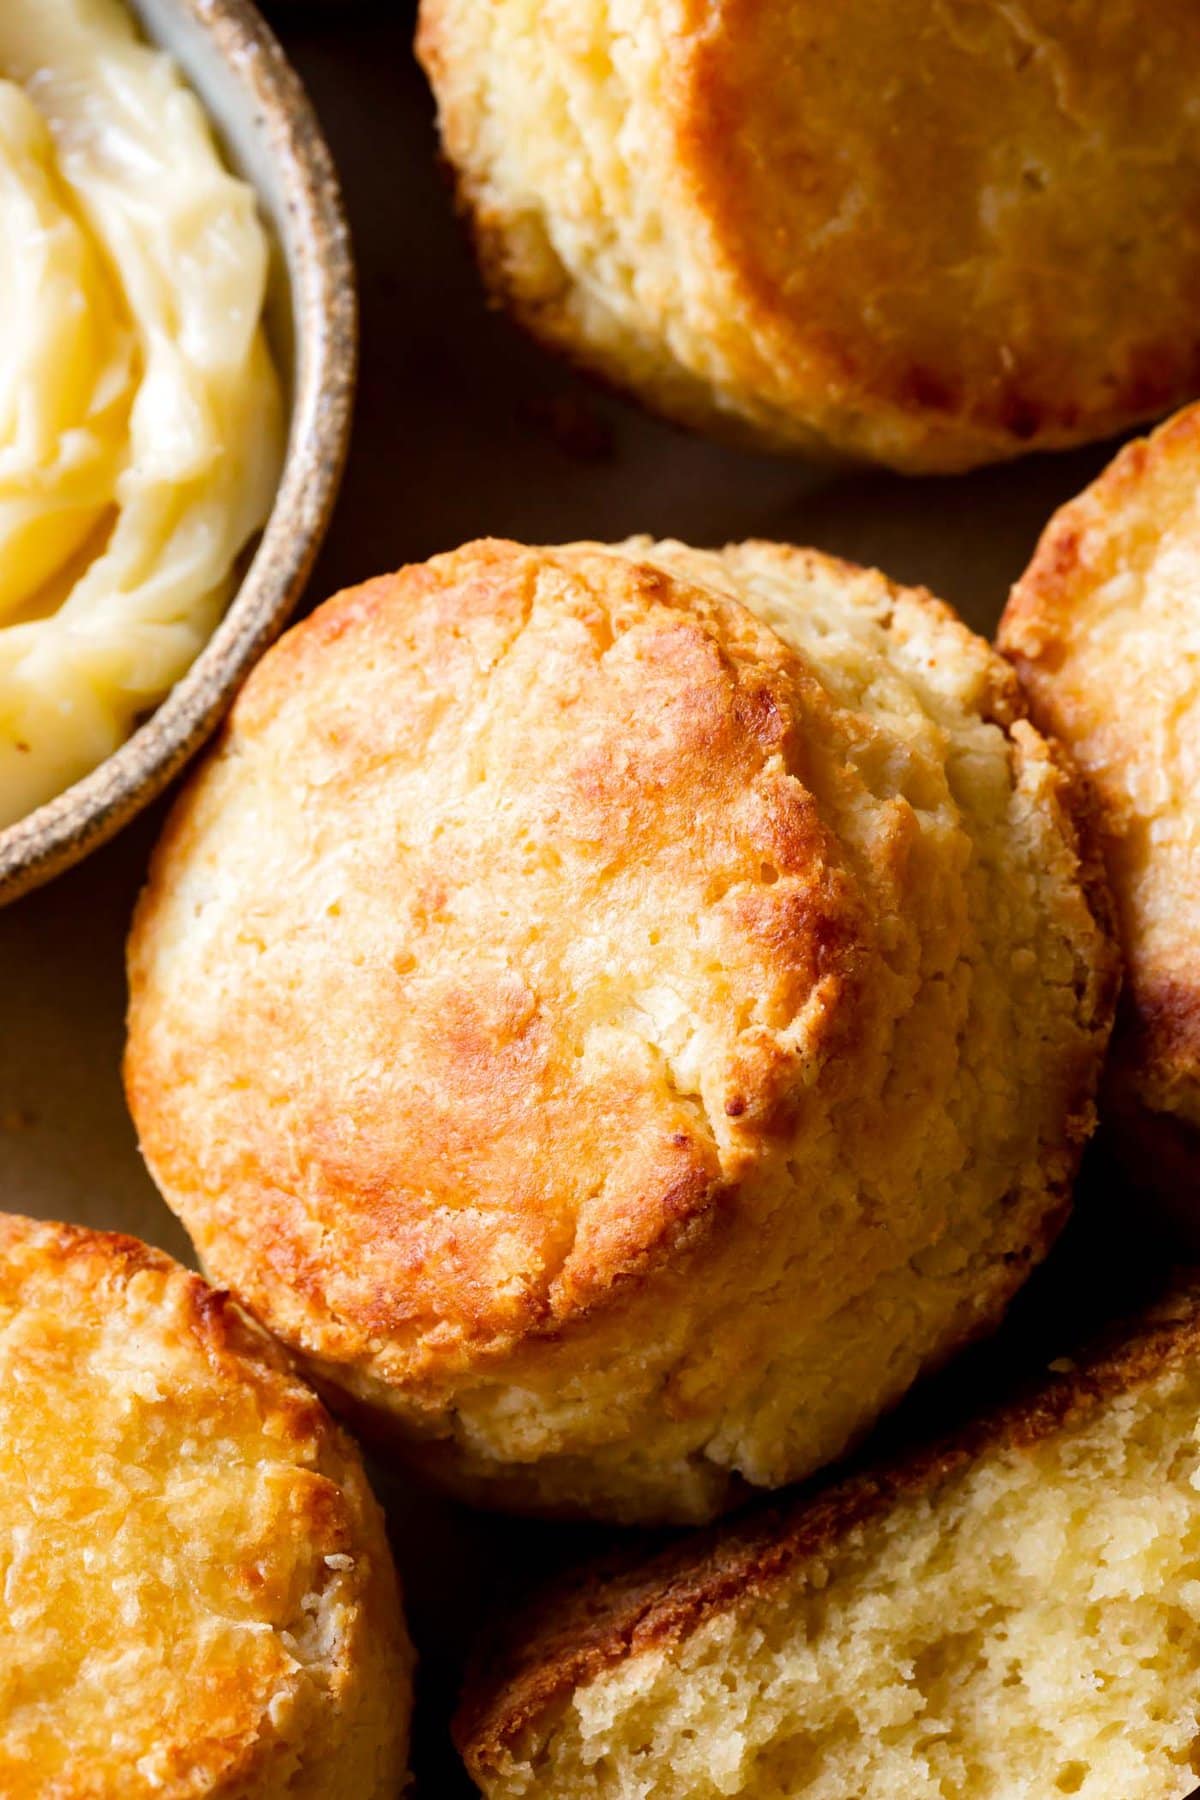 golden, buttery biscuits are lounging in a bowl